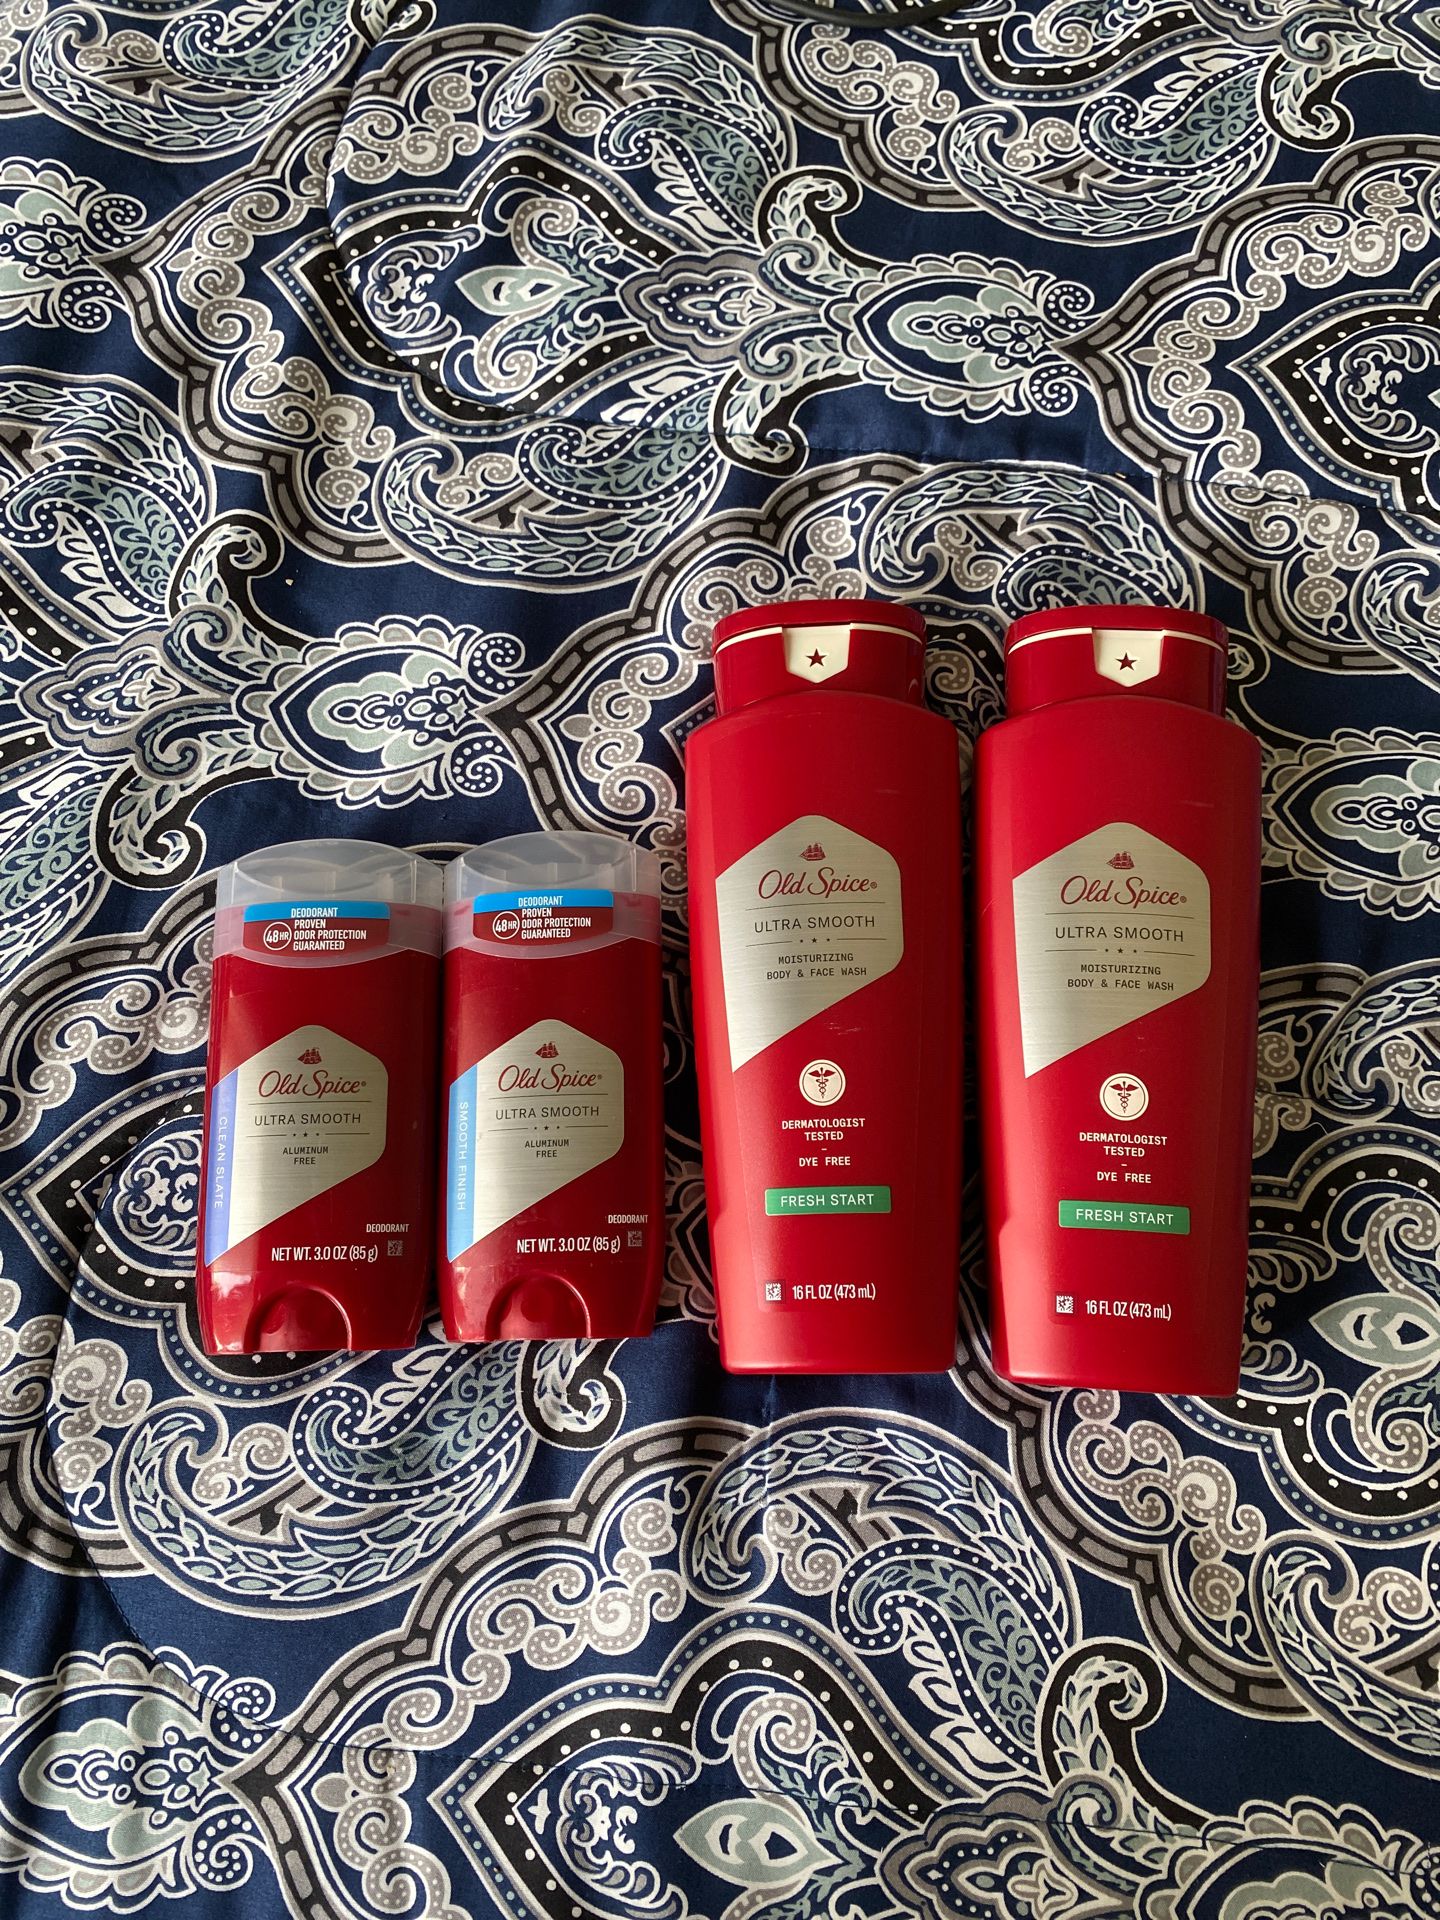 Old spice body wash and 2 deodorants